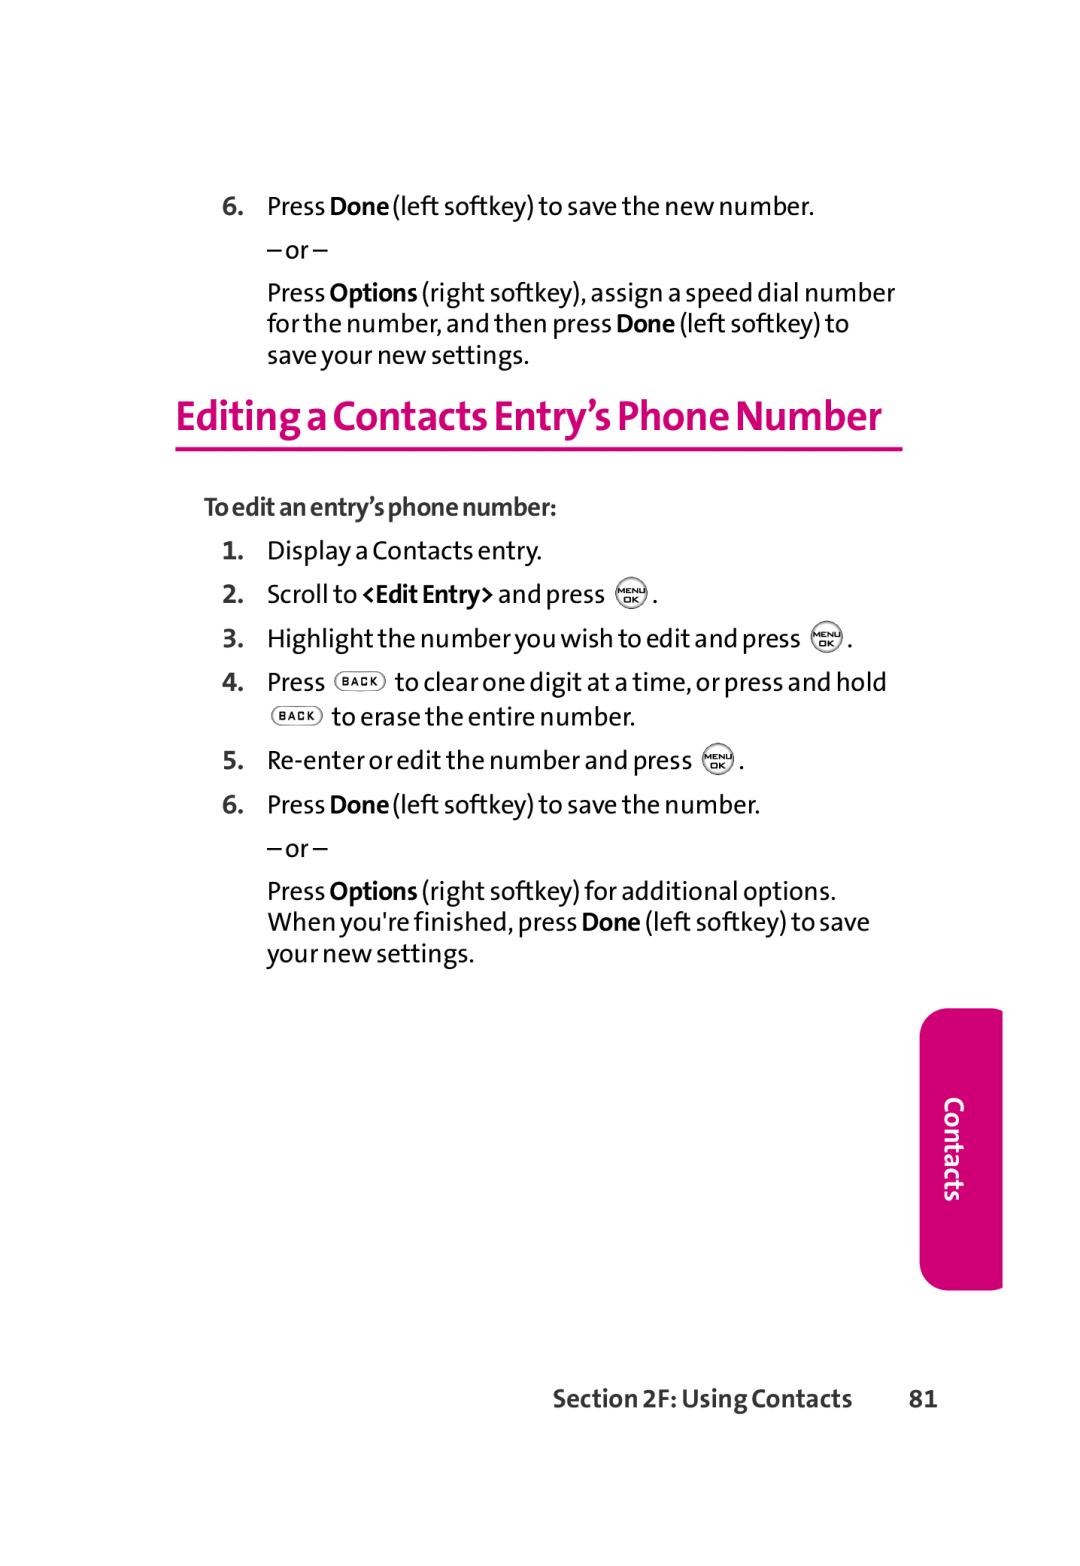 LG Electronics 350 manual Editing a Contacts Entry’s Phone Number, Toeditanentry’sphonenumber 